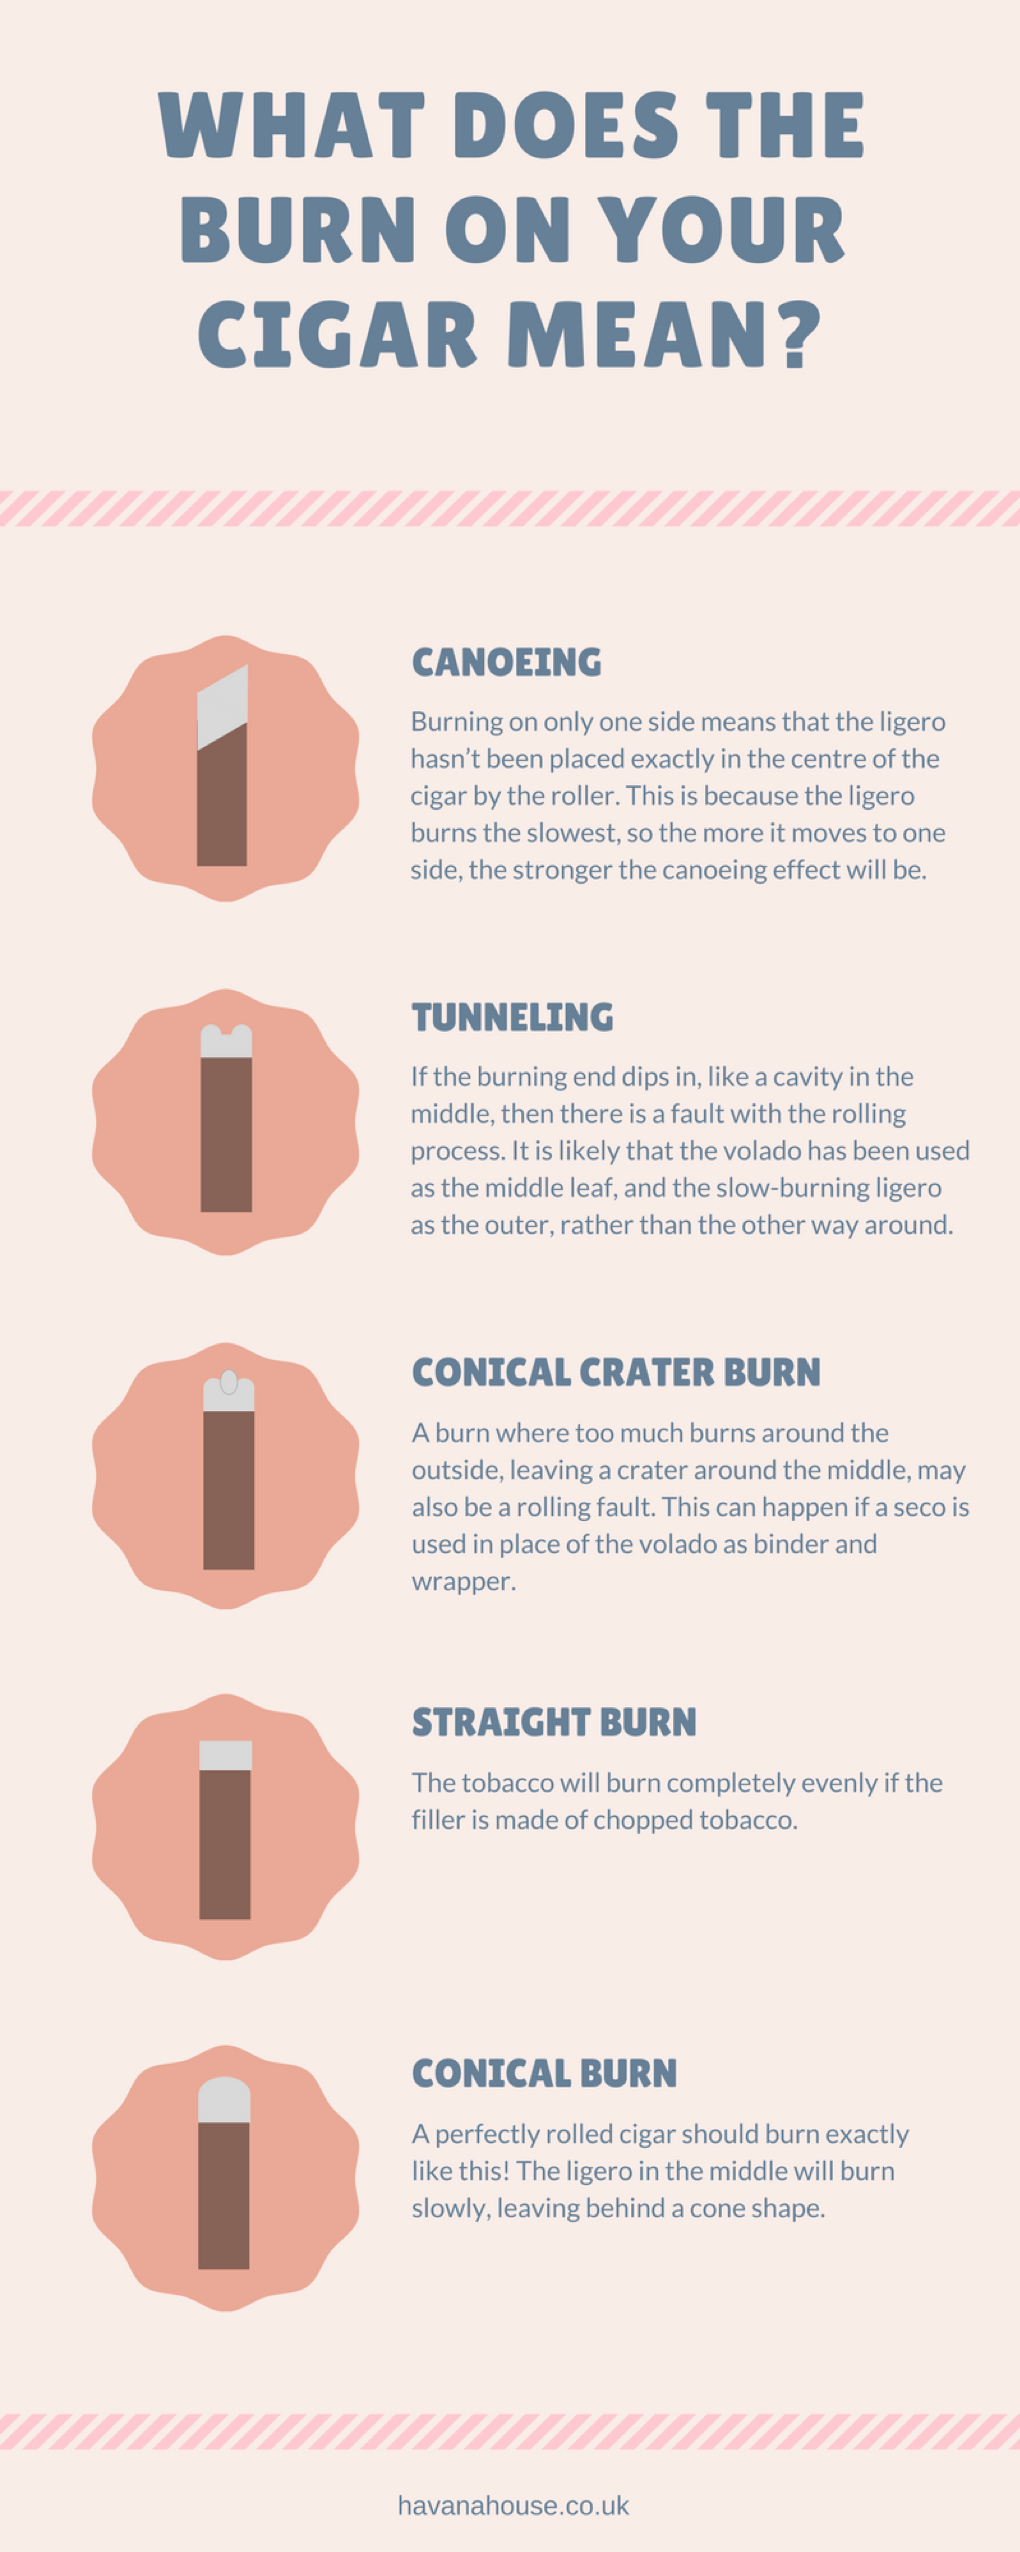 an infographic showing the different burn types of cigars